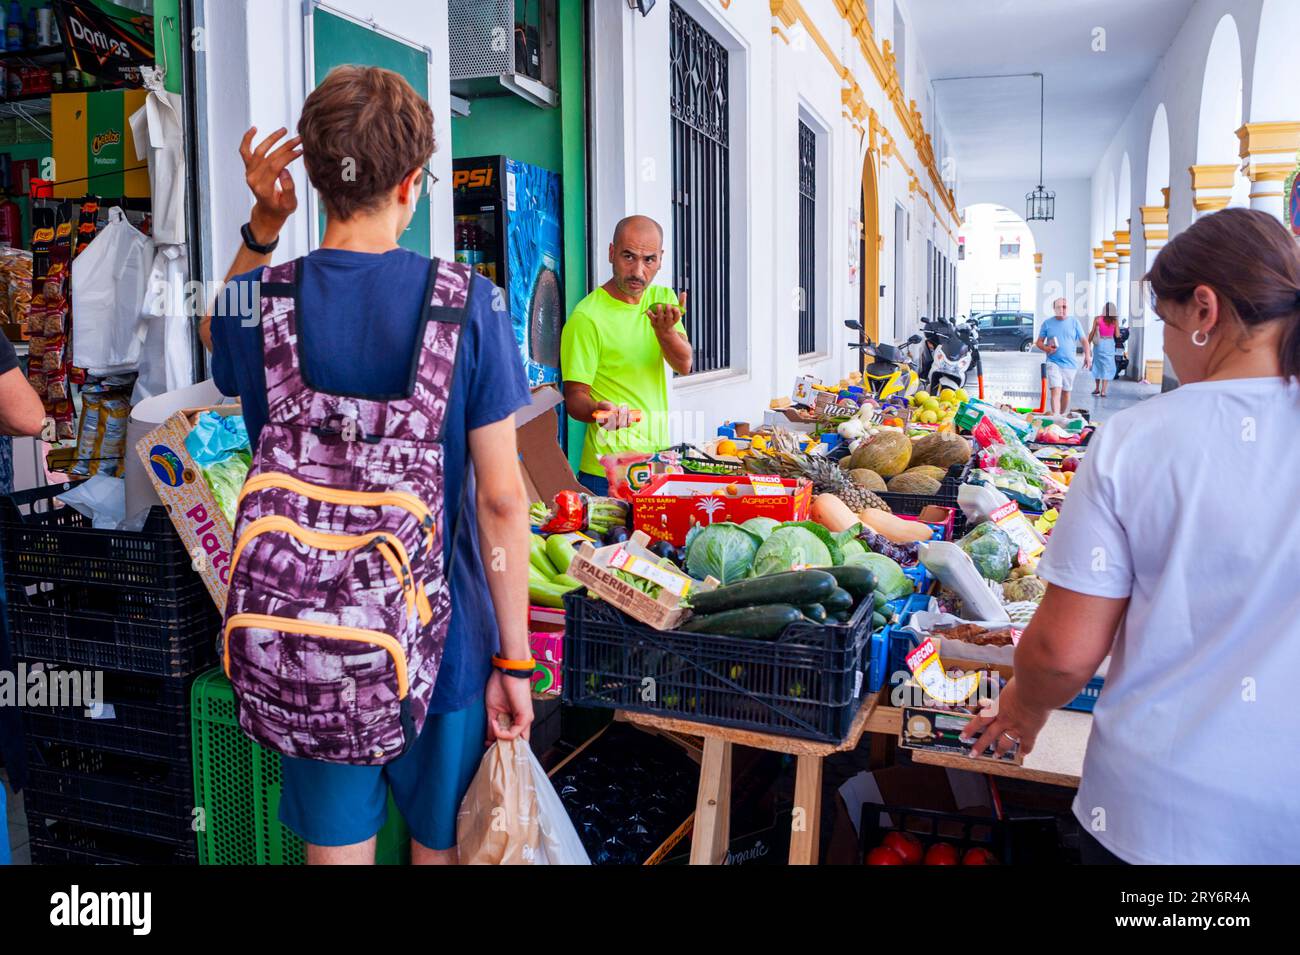 Seville, Spain, Small Crowd People, Shopping in Public Food Market, 'El Arenal Market',  in Old Town Center, Local Grocery Shop Display, Woman Stock Photo